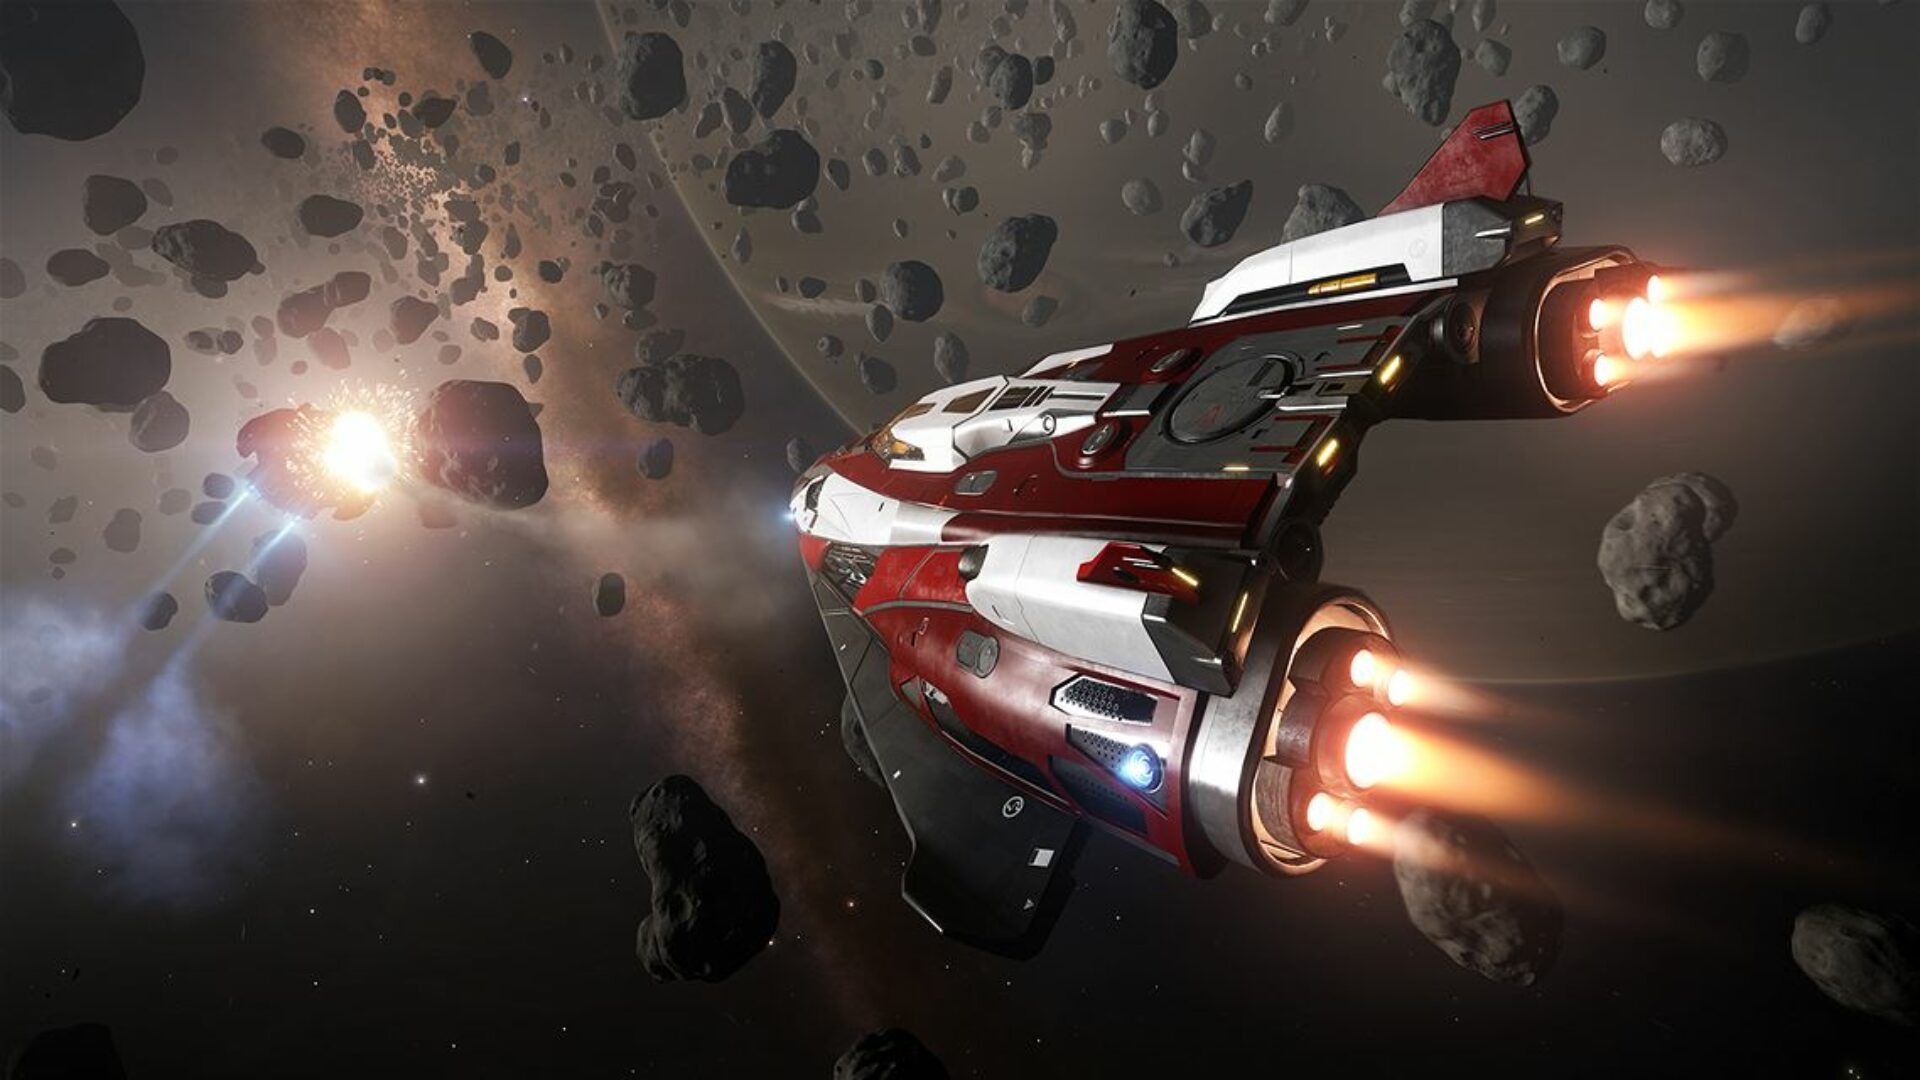 E3 2015: Xbox Game Preview Program Launches With Elite: Dangerous, The Long Dark